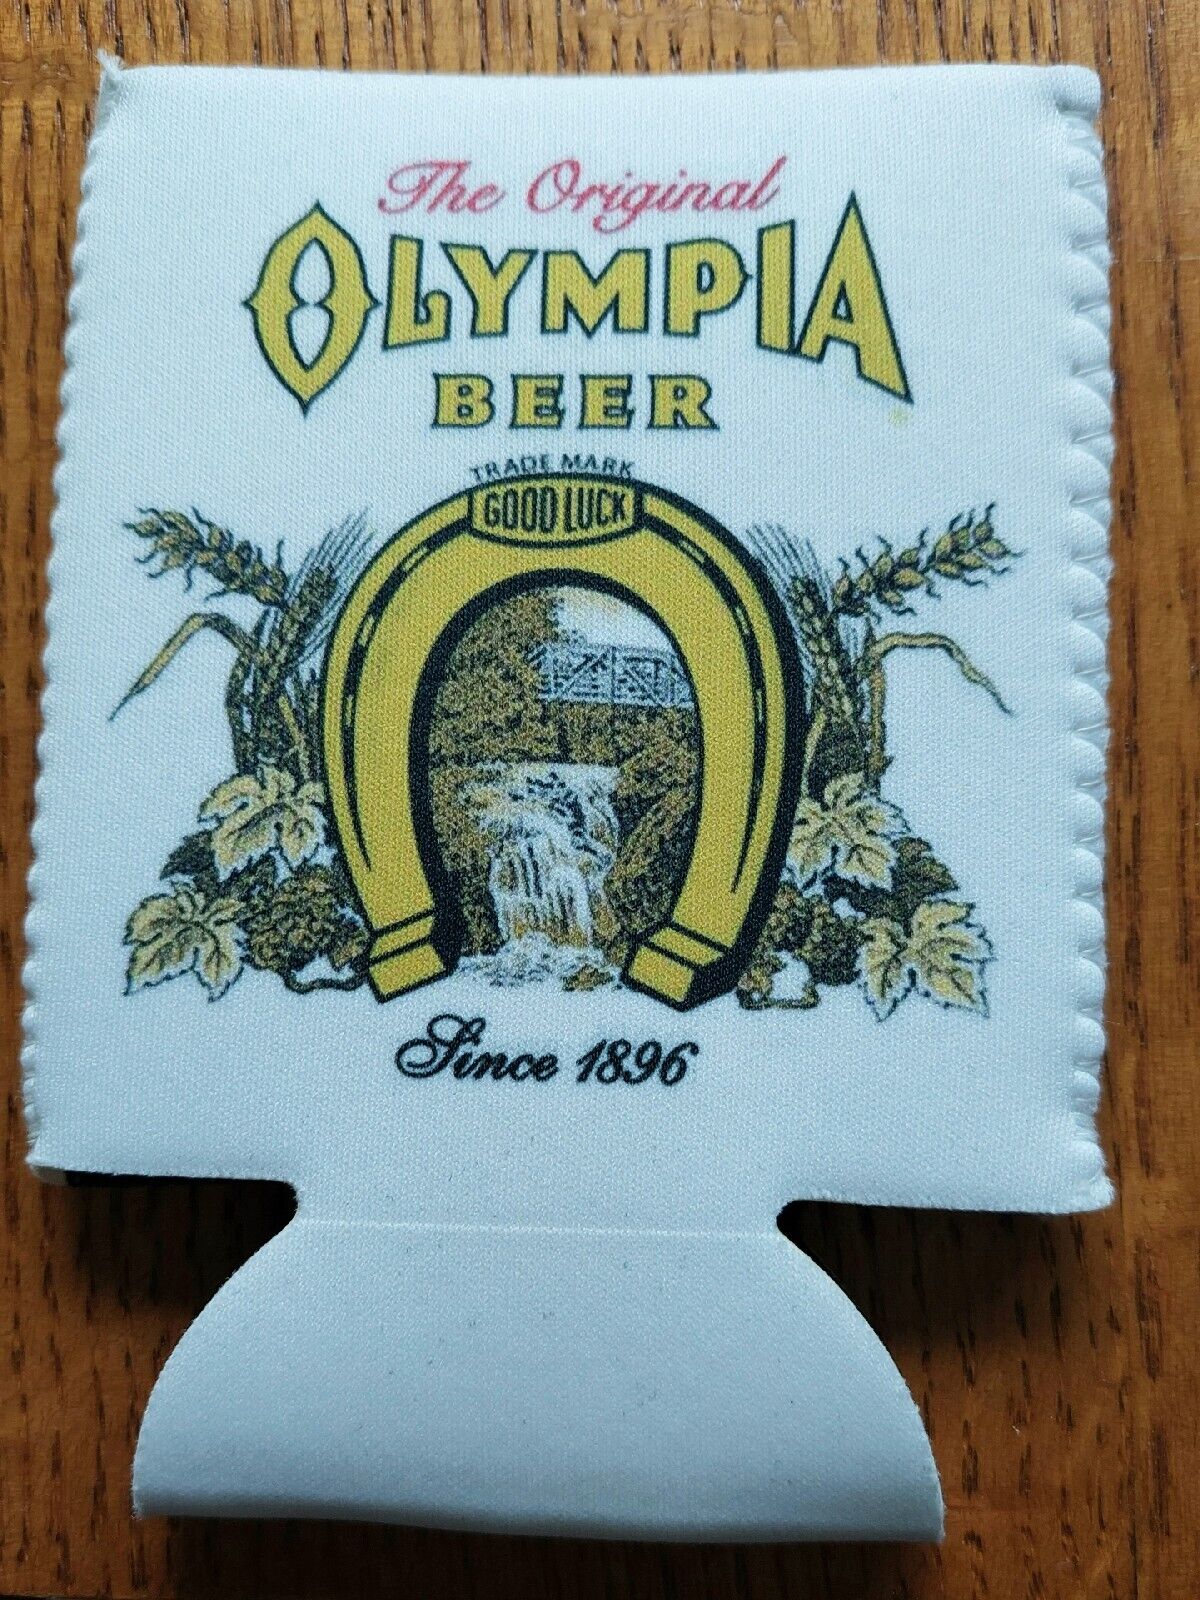 OLYMPIA BEER CAN/BOTTLE HOLDER KOOZIE COOZIE CHECK IT OUT